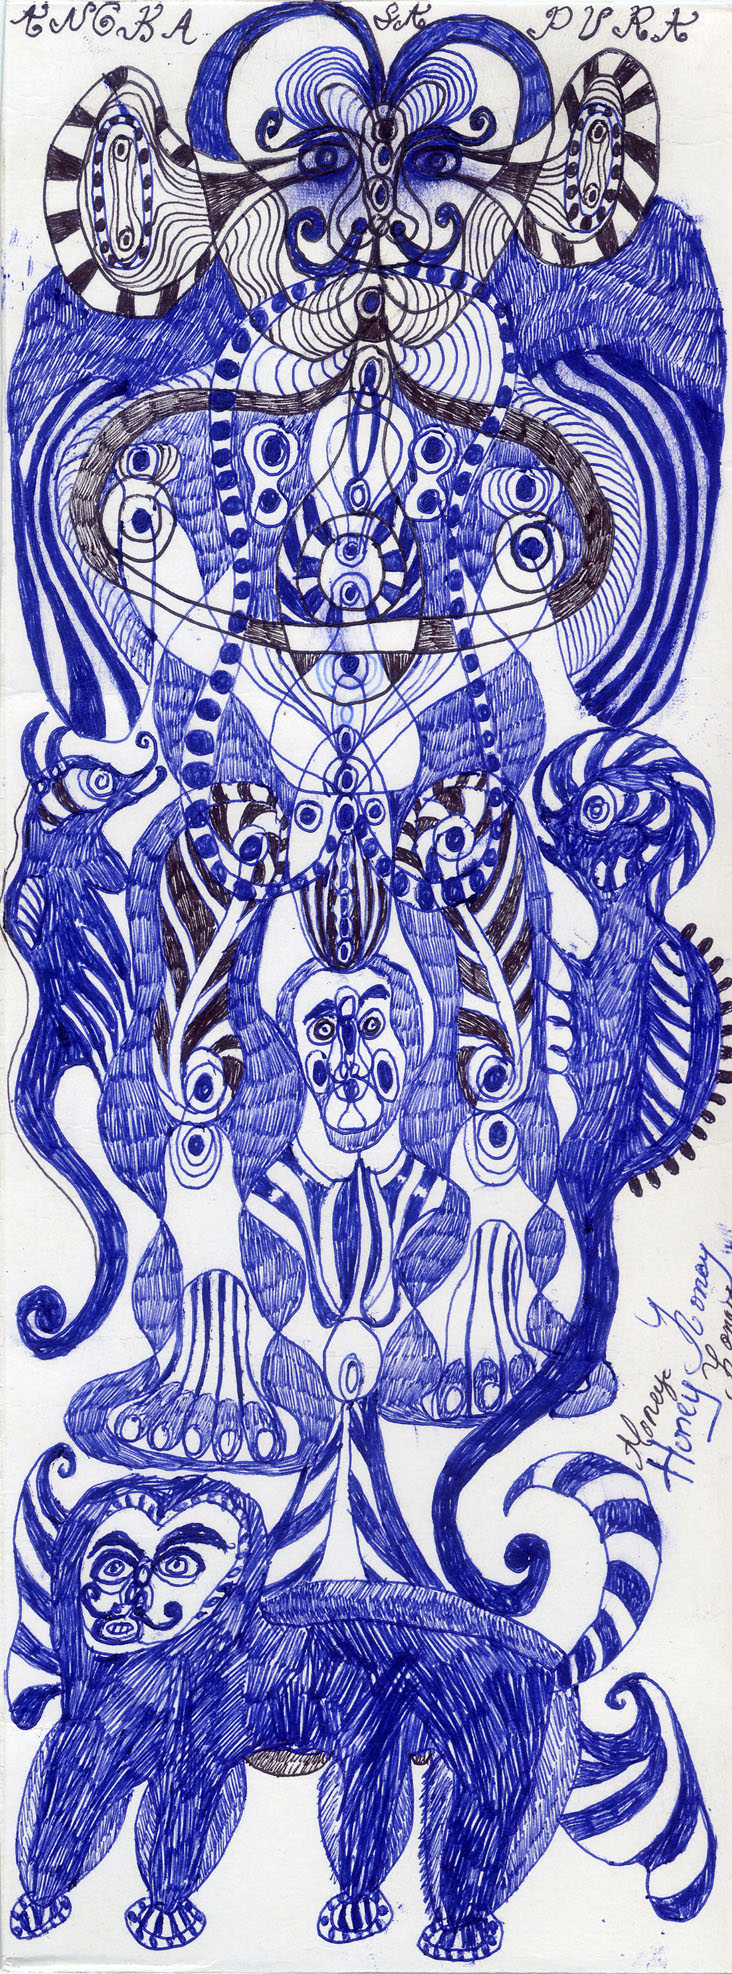 <strong>Untitled</strong> <br/> Ink and marker on wastepaper / 25 x 9.5cm / 2013 